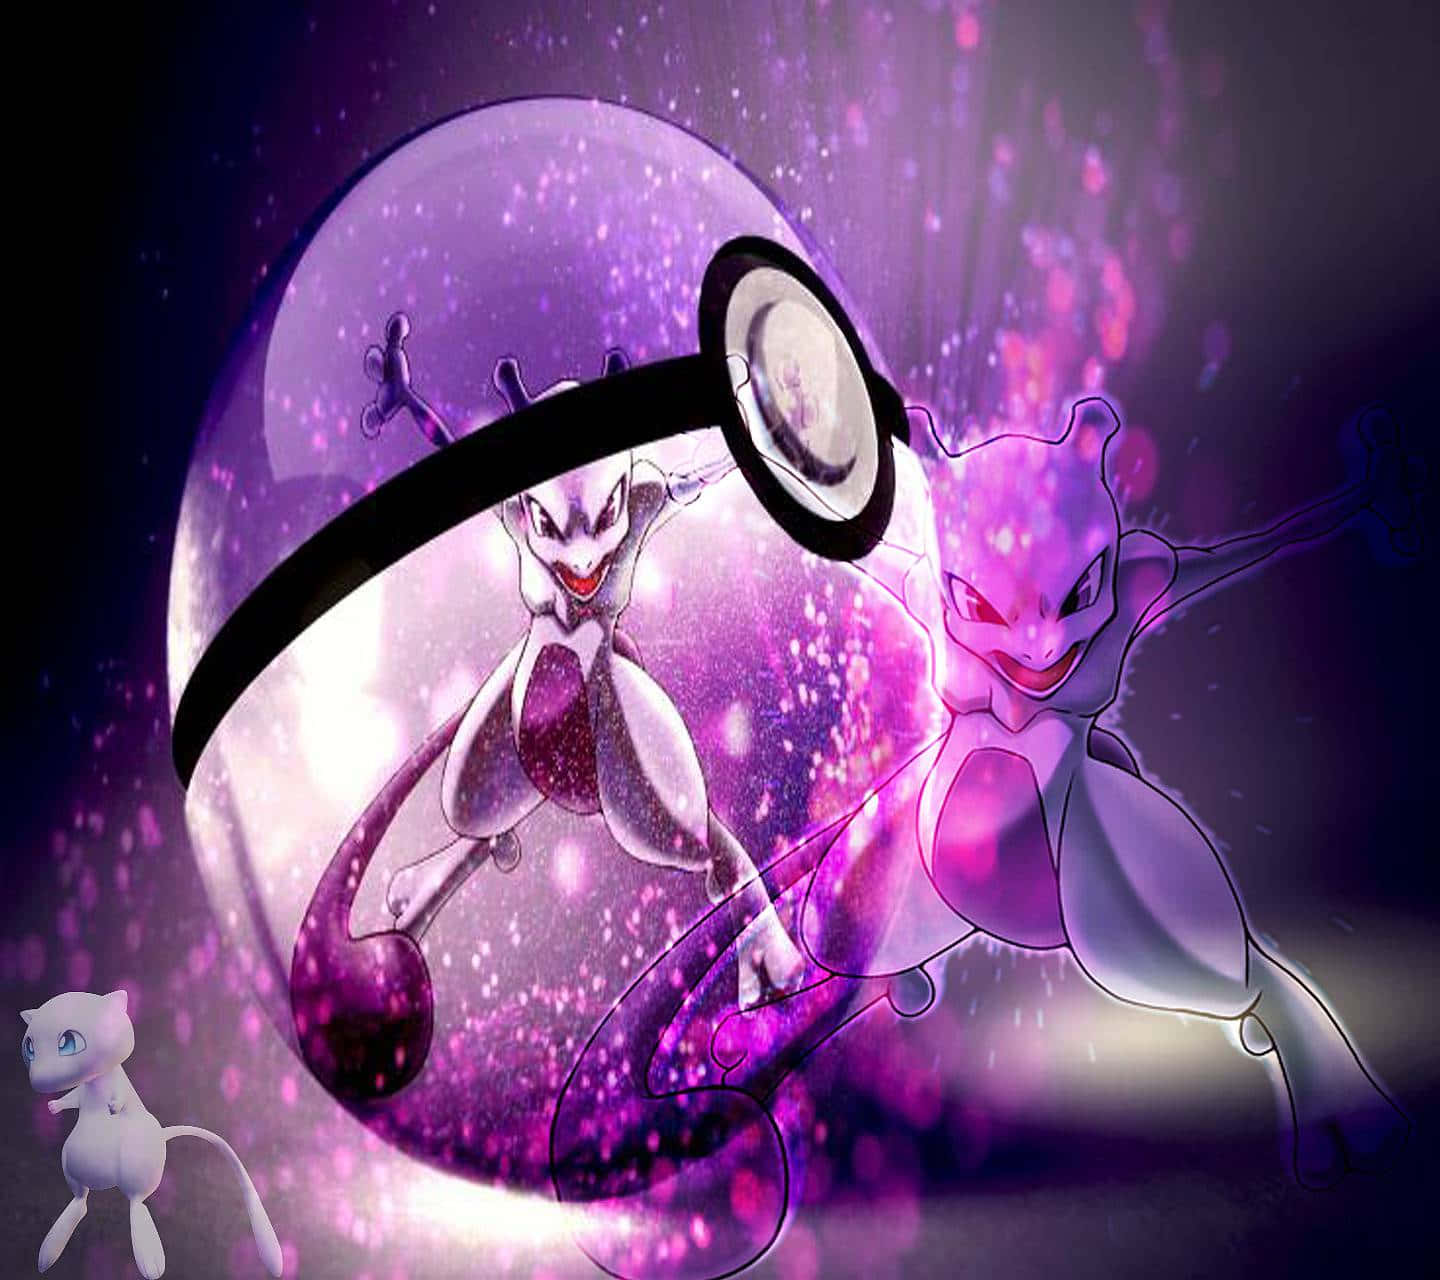 "The powerful Pokémon Mewtwo stands tall amidst a storm of psychic energy"